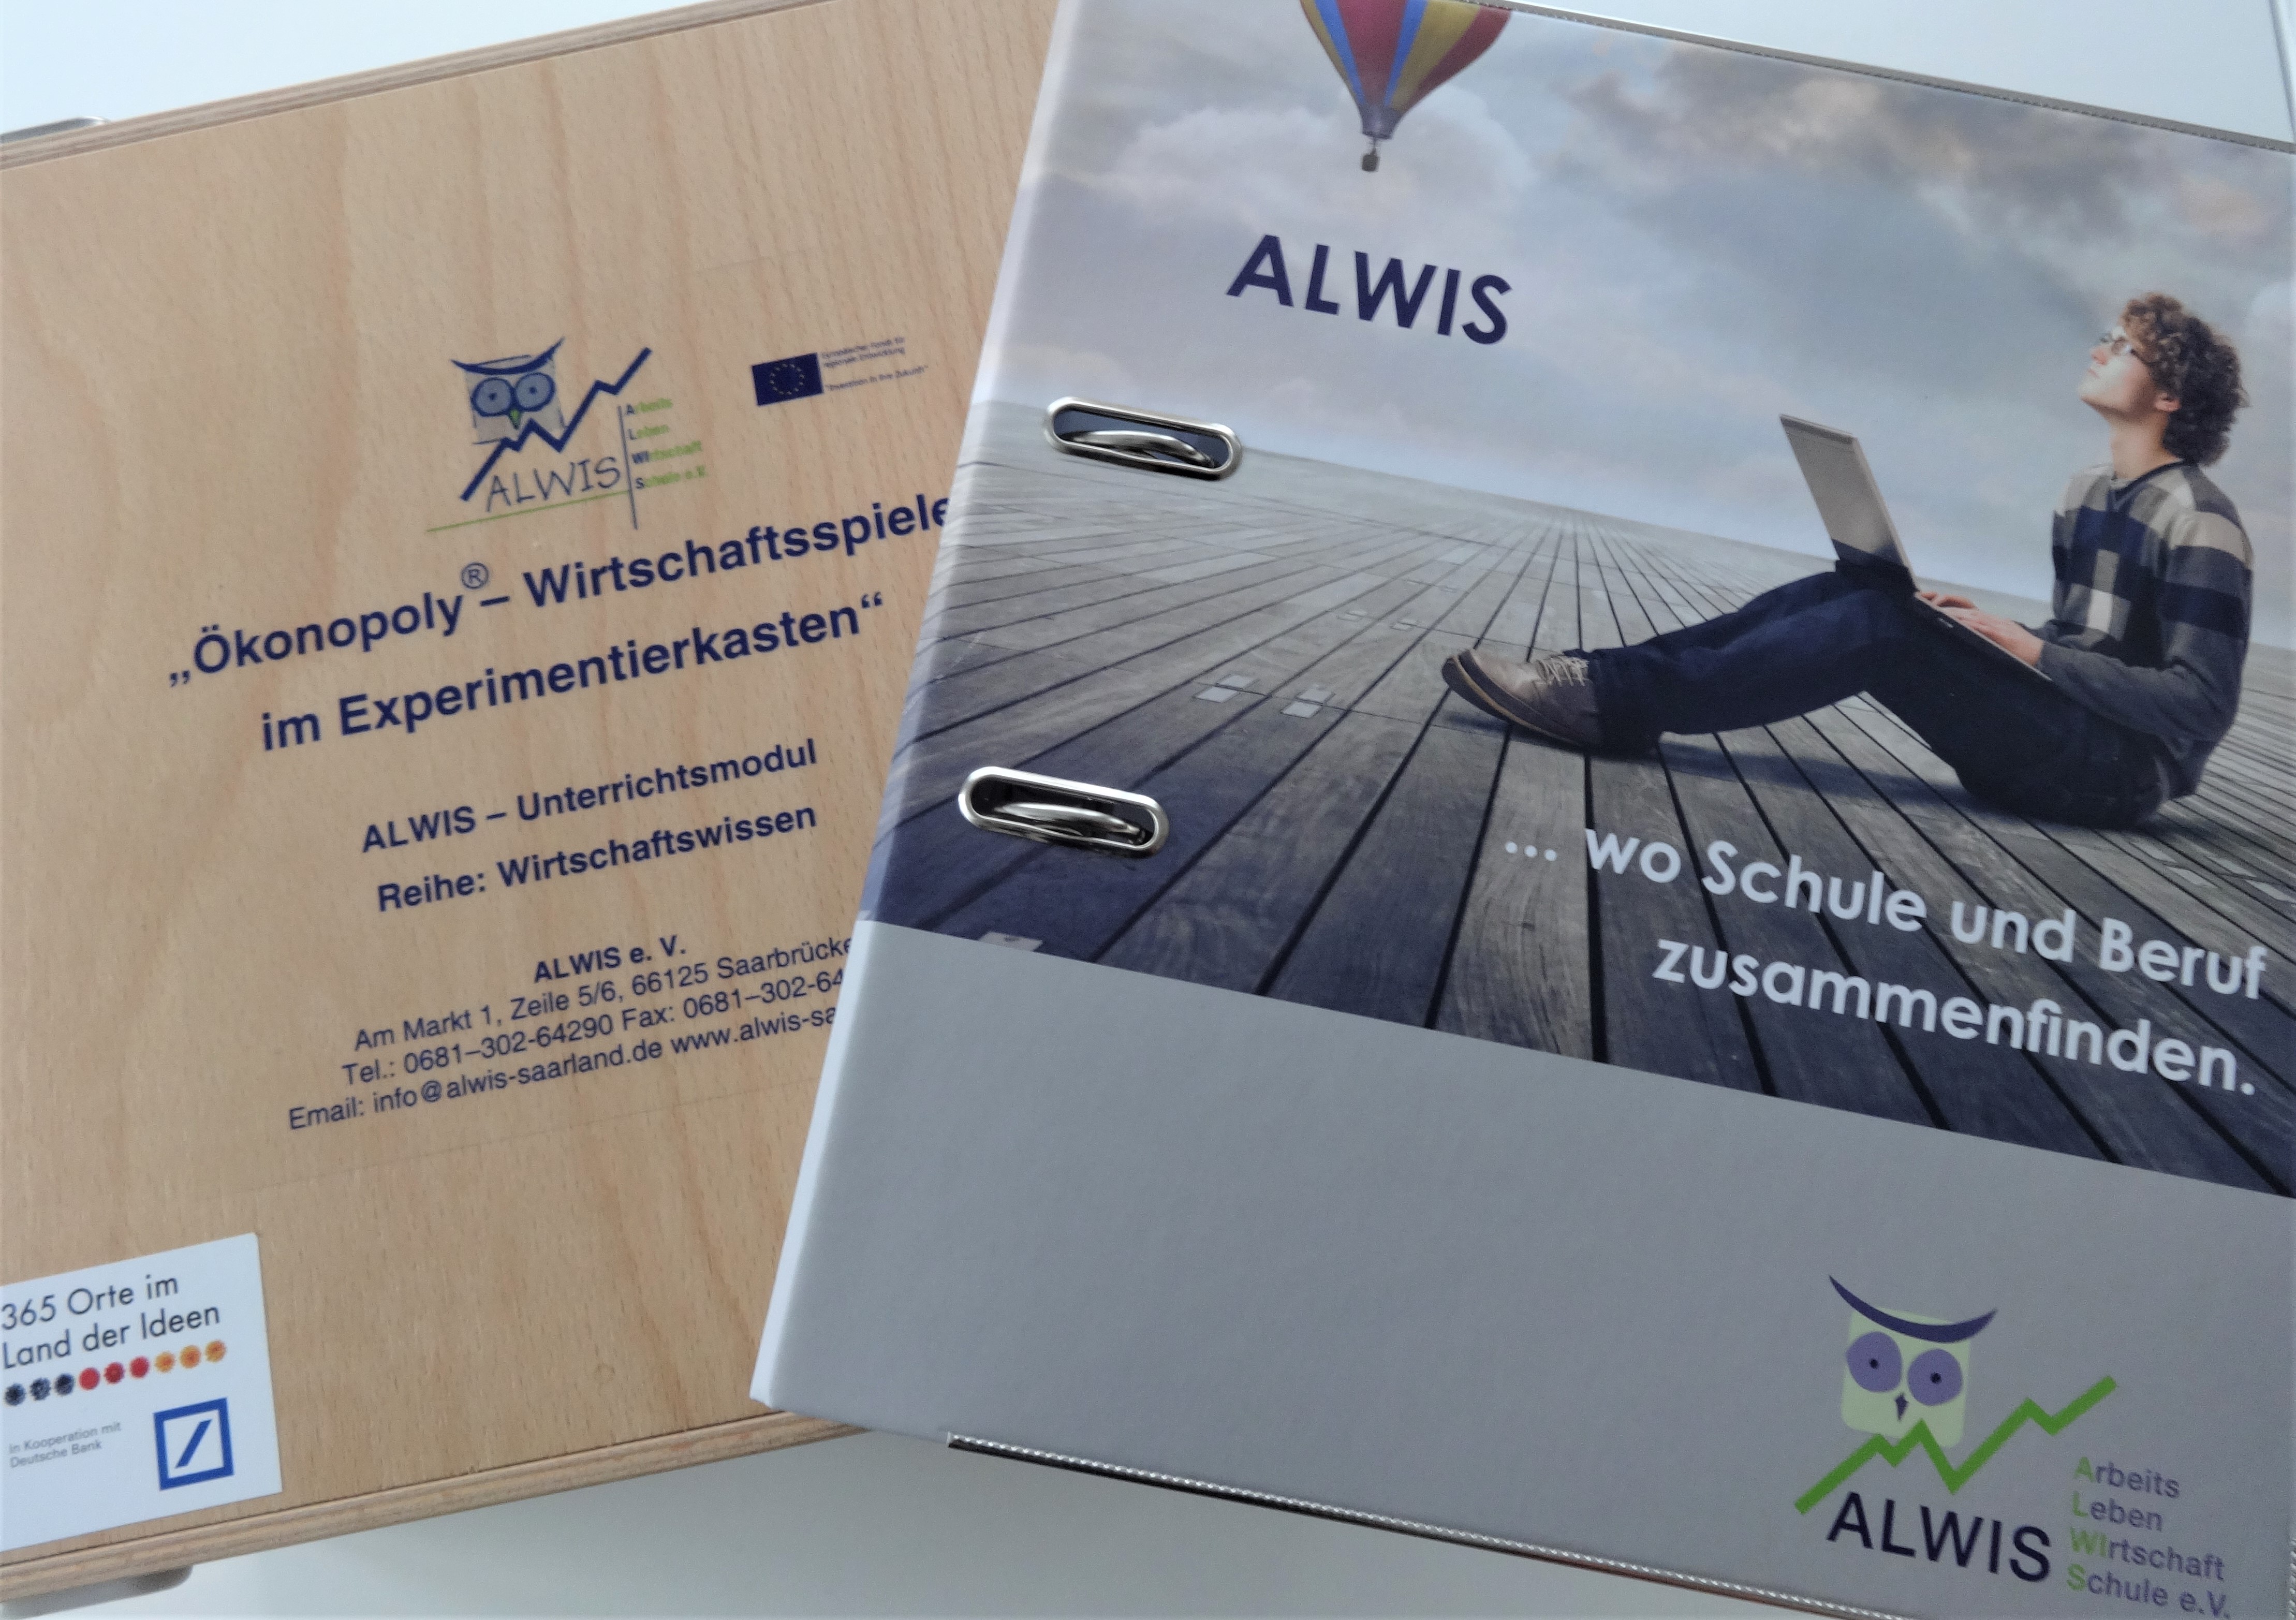 The ALWIS aims to provide schools with additional materials, projects, and events about business knowledge, career orientation and furthering the interest for STEM subjects.